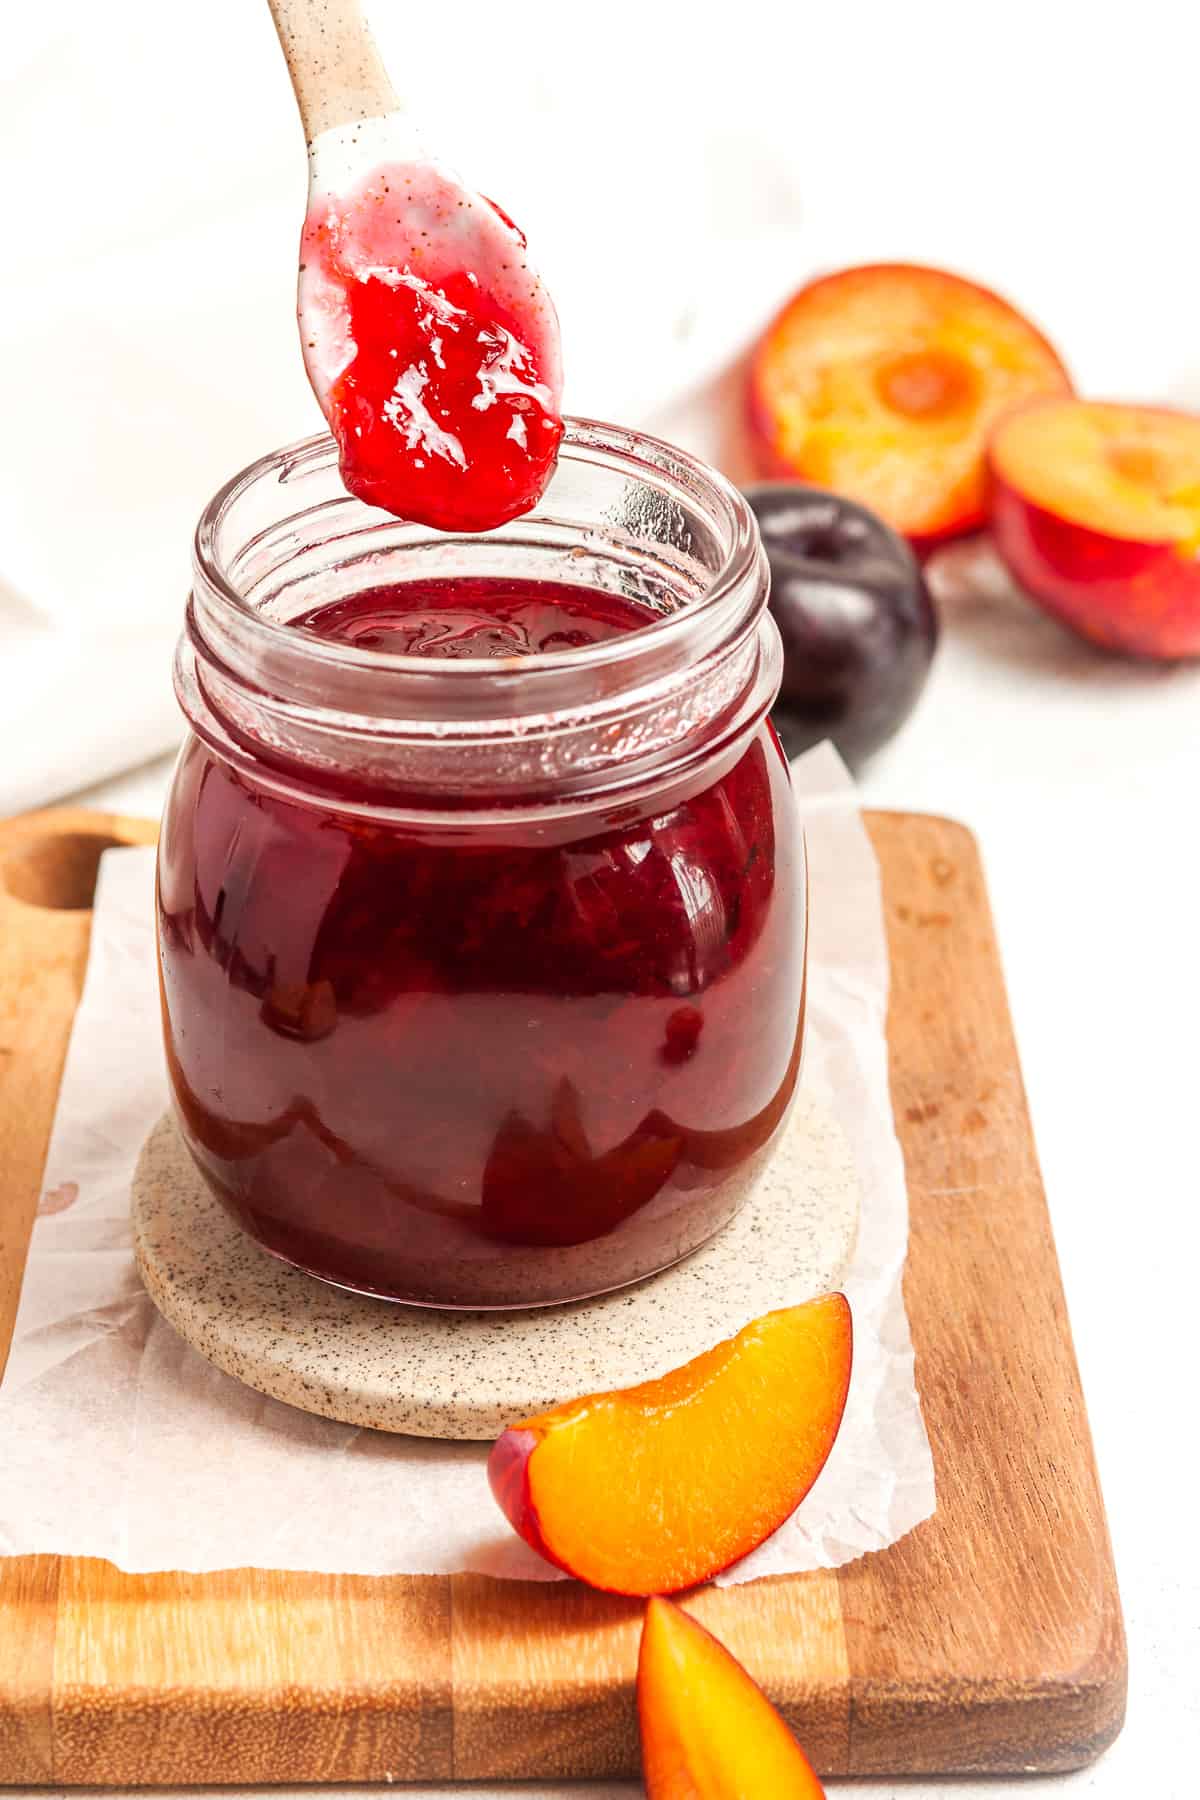 Spoon dipping into a jar of jam.